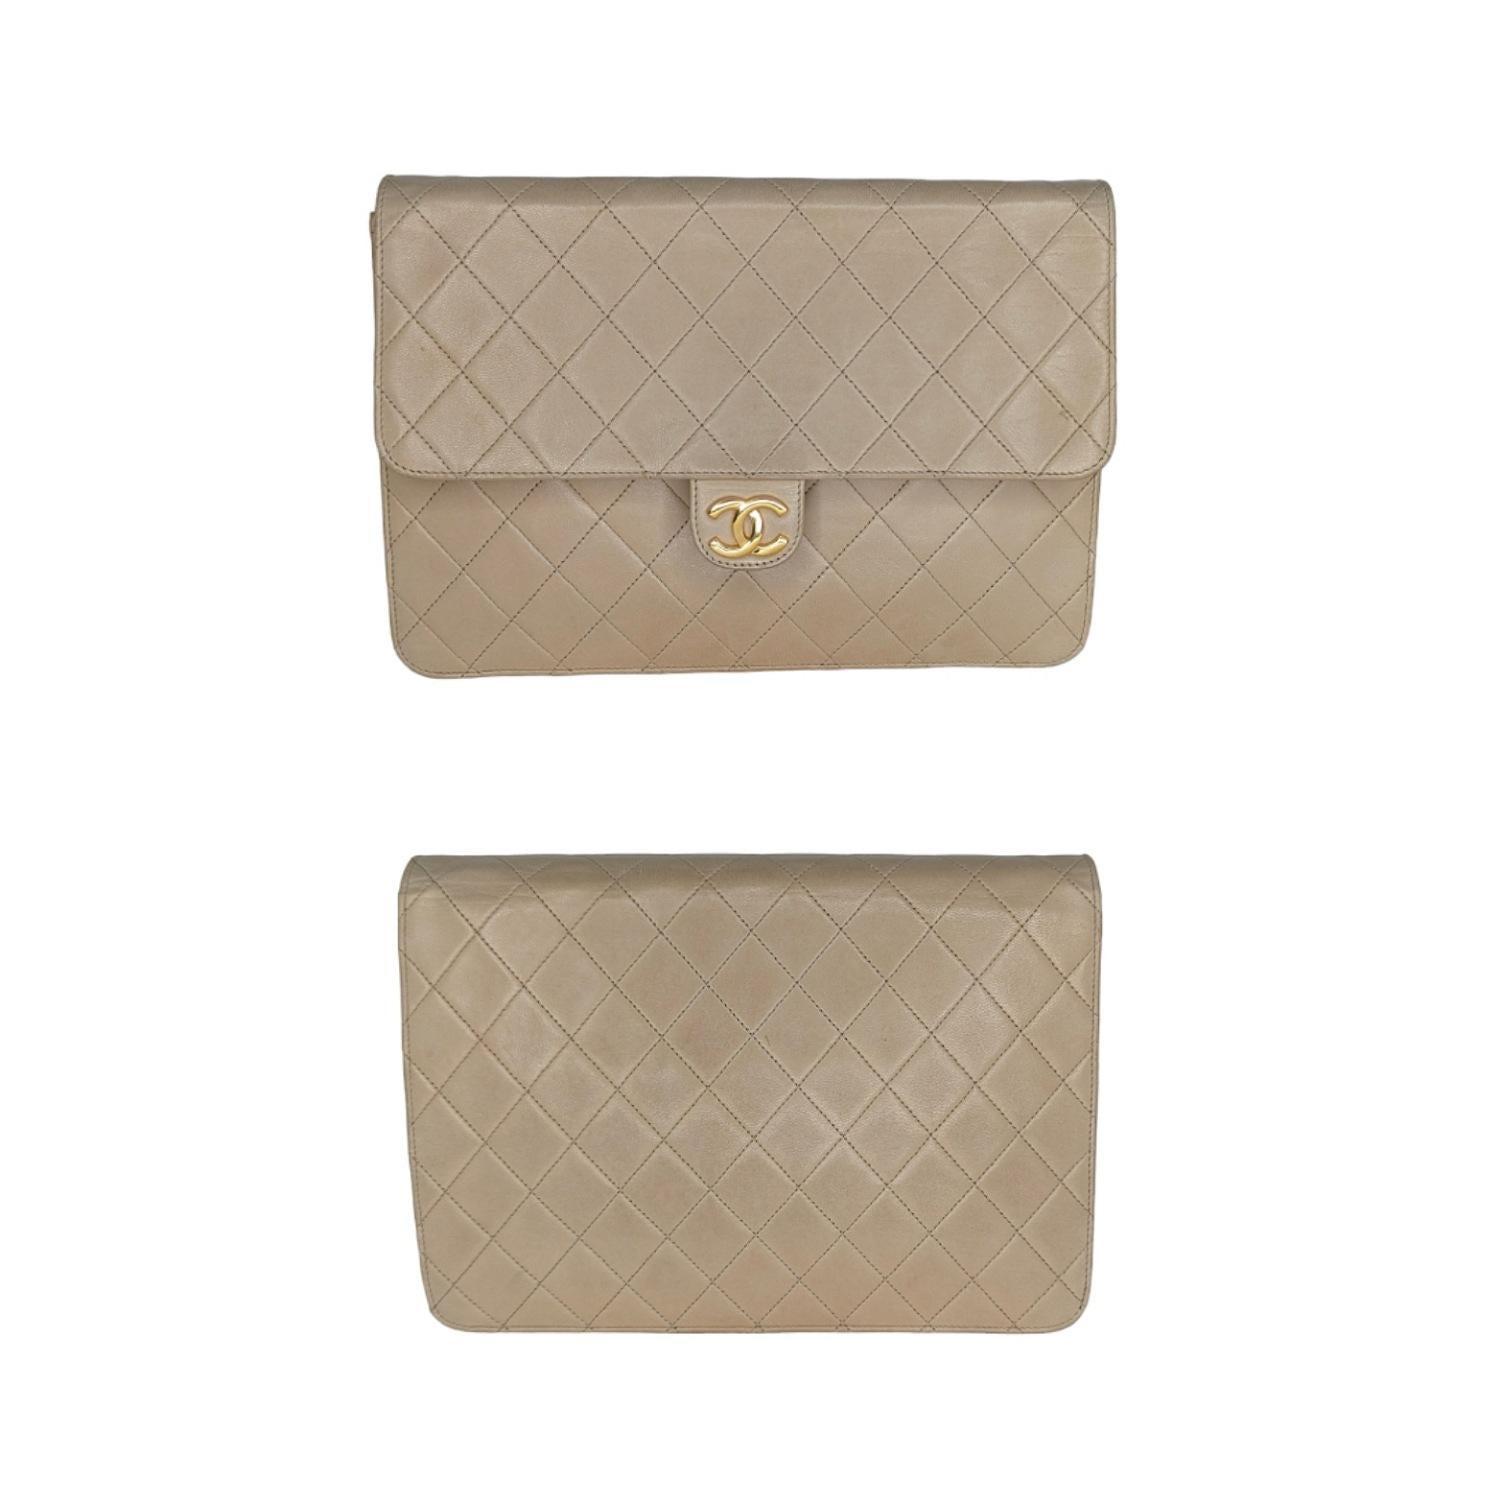 Chanel Vintage Beige Quilted Lambskin Medium Flap Bag In Good Condition For Sale In Scottsdale, AZ